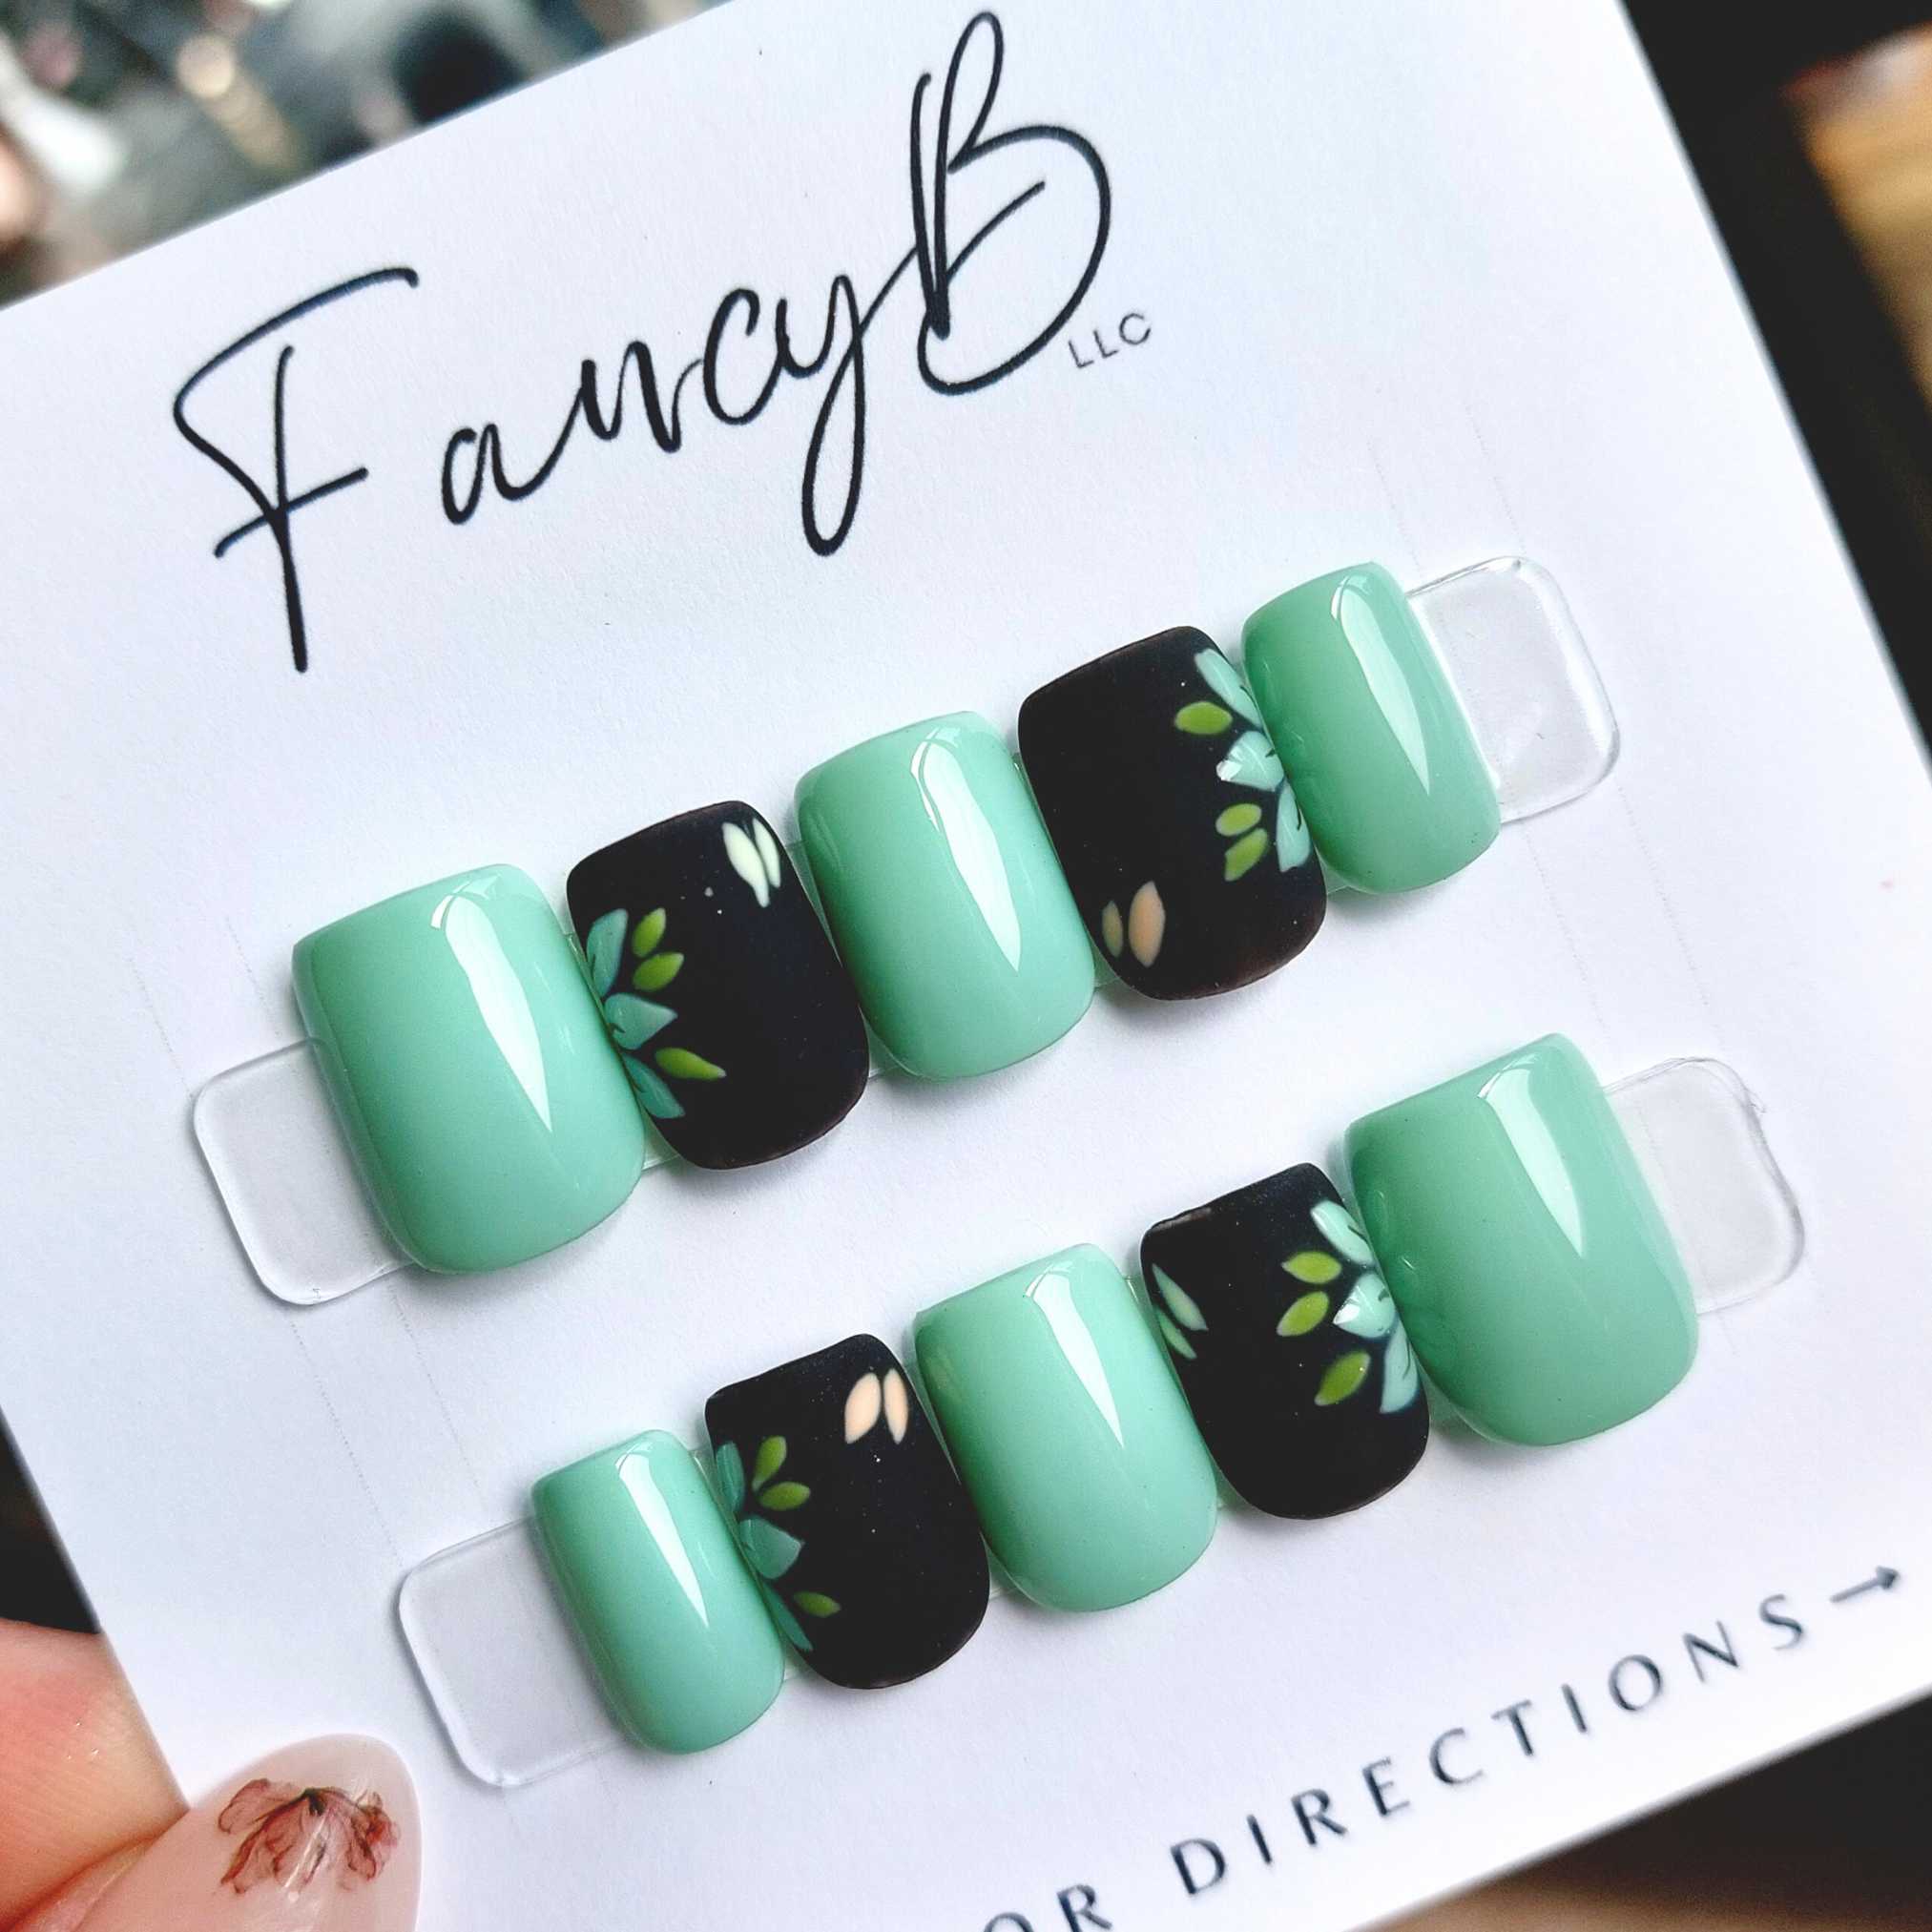 custom nails seafoam green tropical with matte black and florals with leaves and gloss tiffany blue in extra short square, fancyb handmade press on nails 